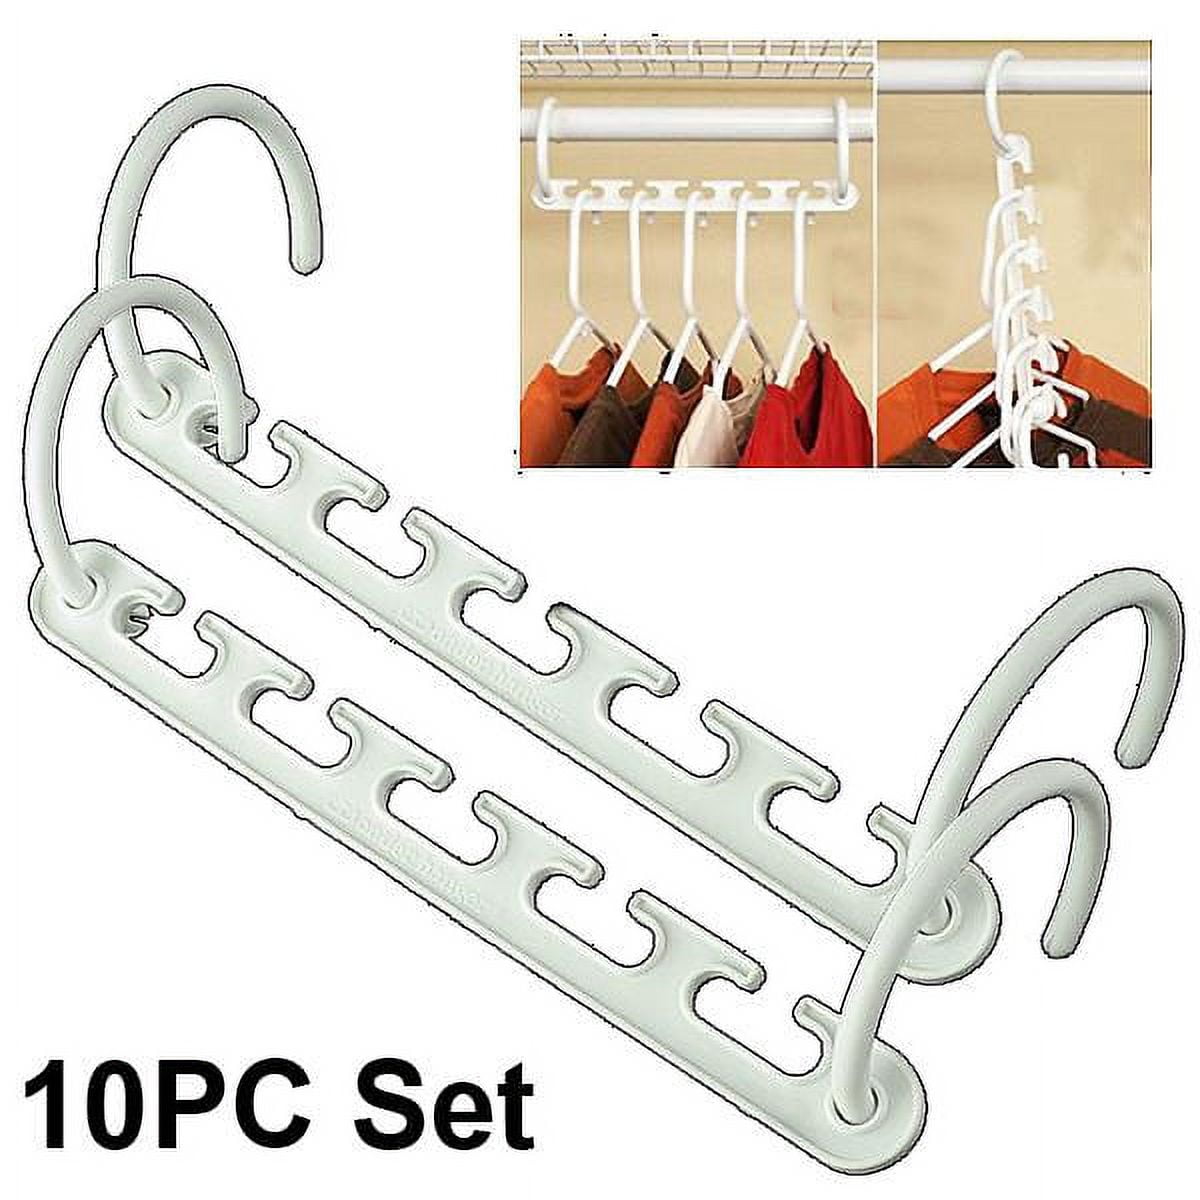 Perfectly Faced Clothes Hangers Colorful Endcap – Fixtures Close Up